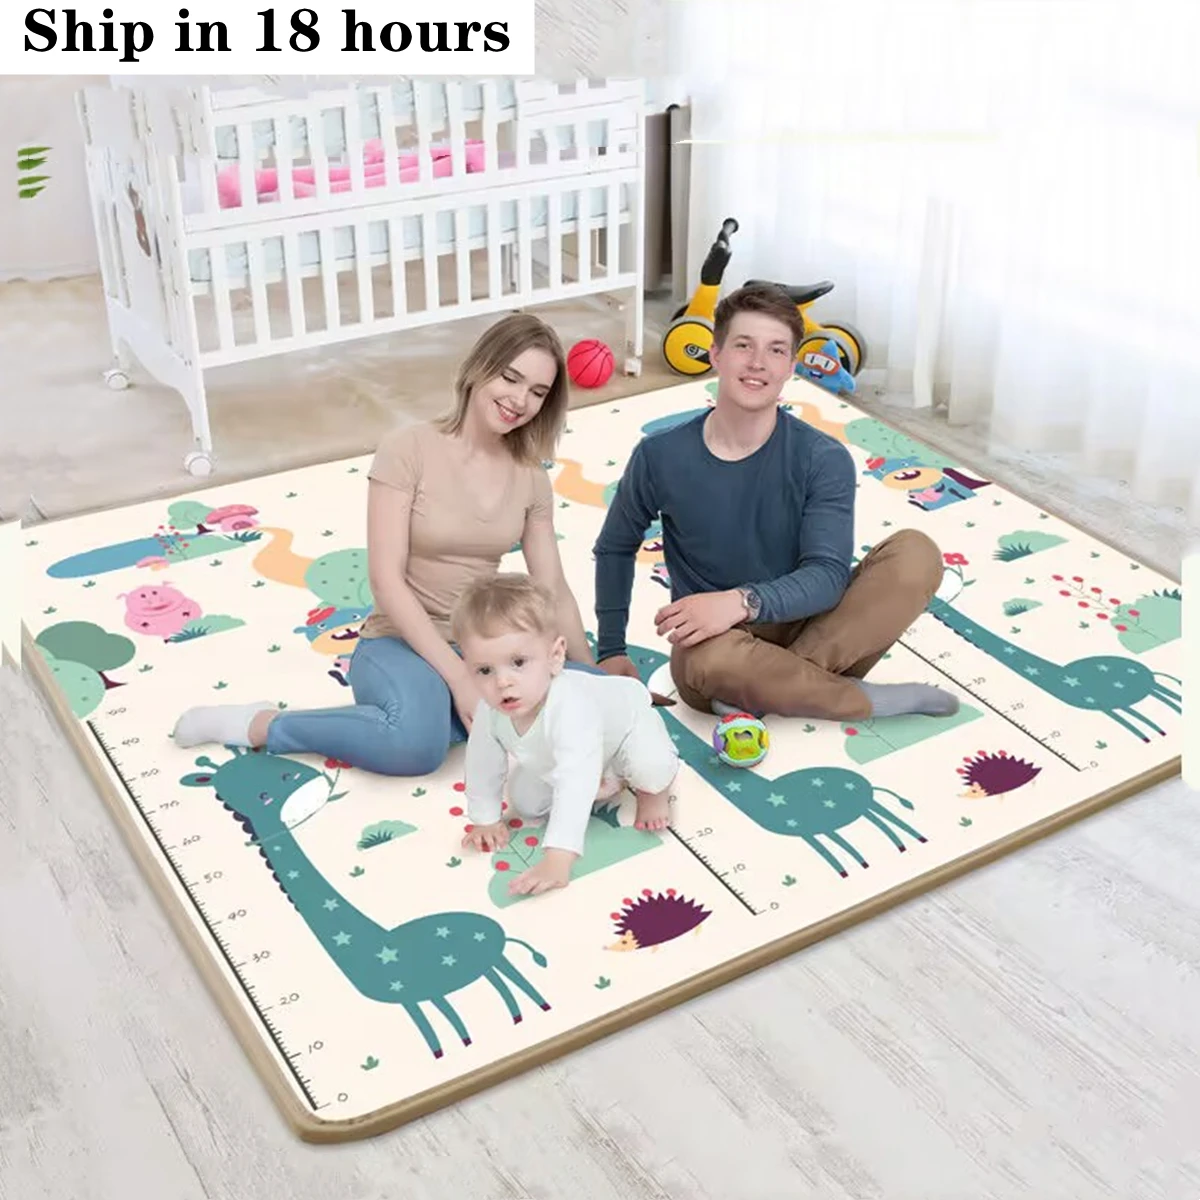 

Large Size Baby Activities Crawling Play Mats Non-toxic Thick EPE Baby Activity Gym Room Mat Game Mat for Children's Safety Rugs